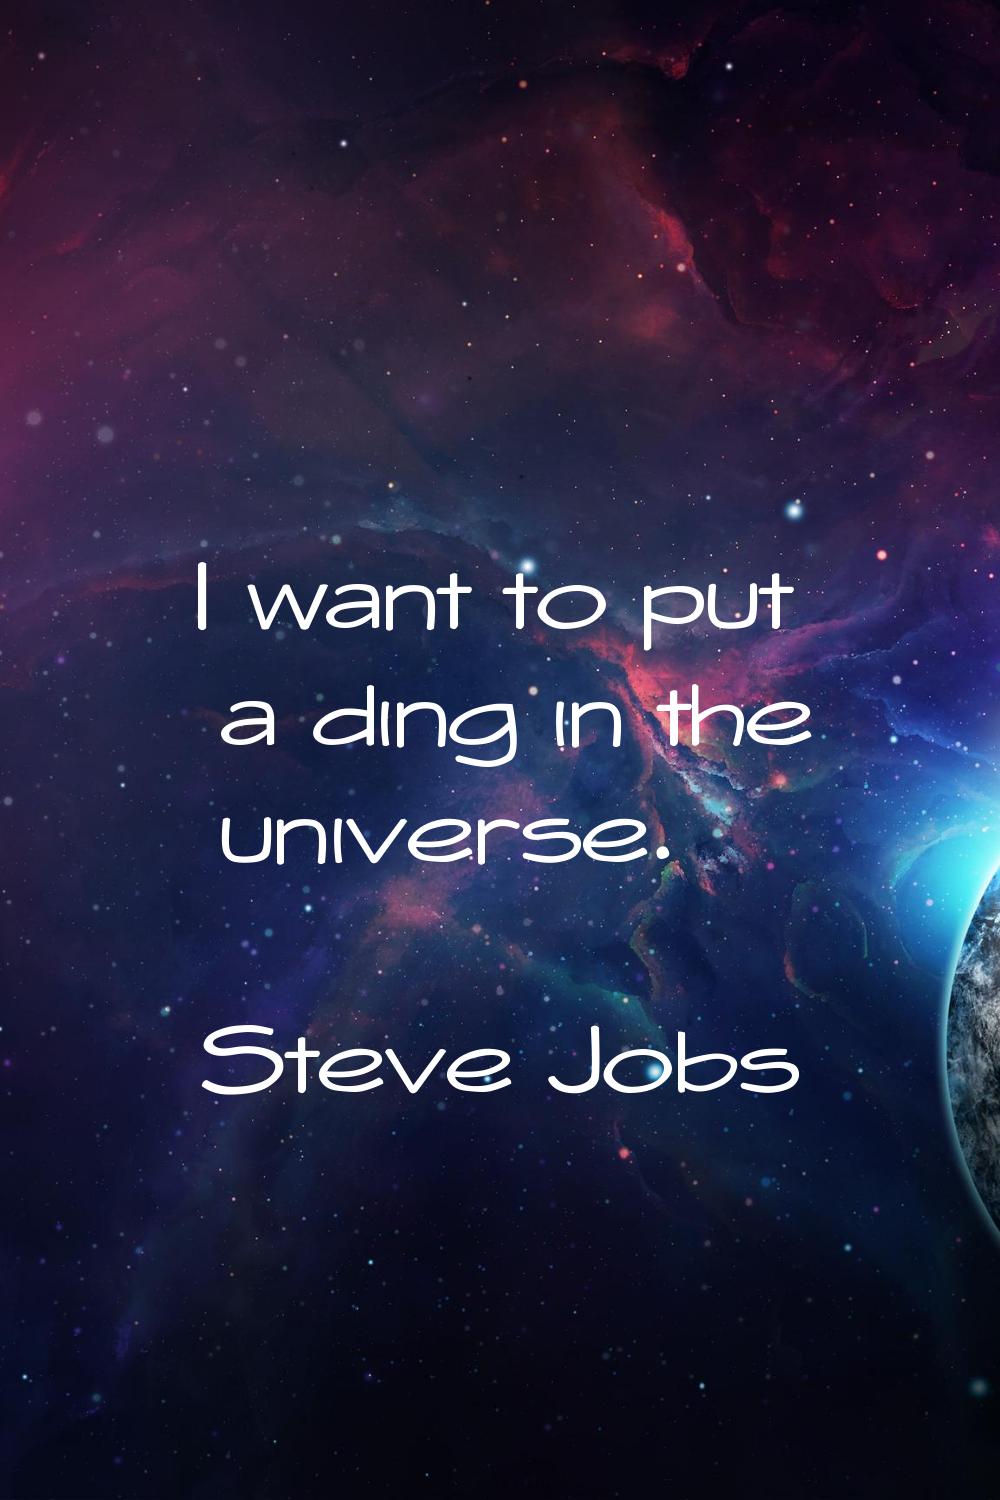 I want to put a ding in the universe.